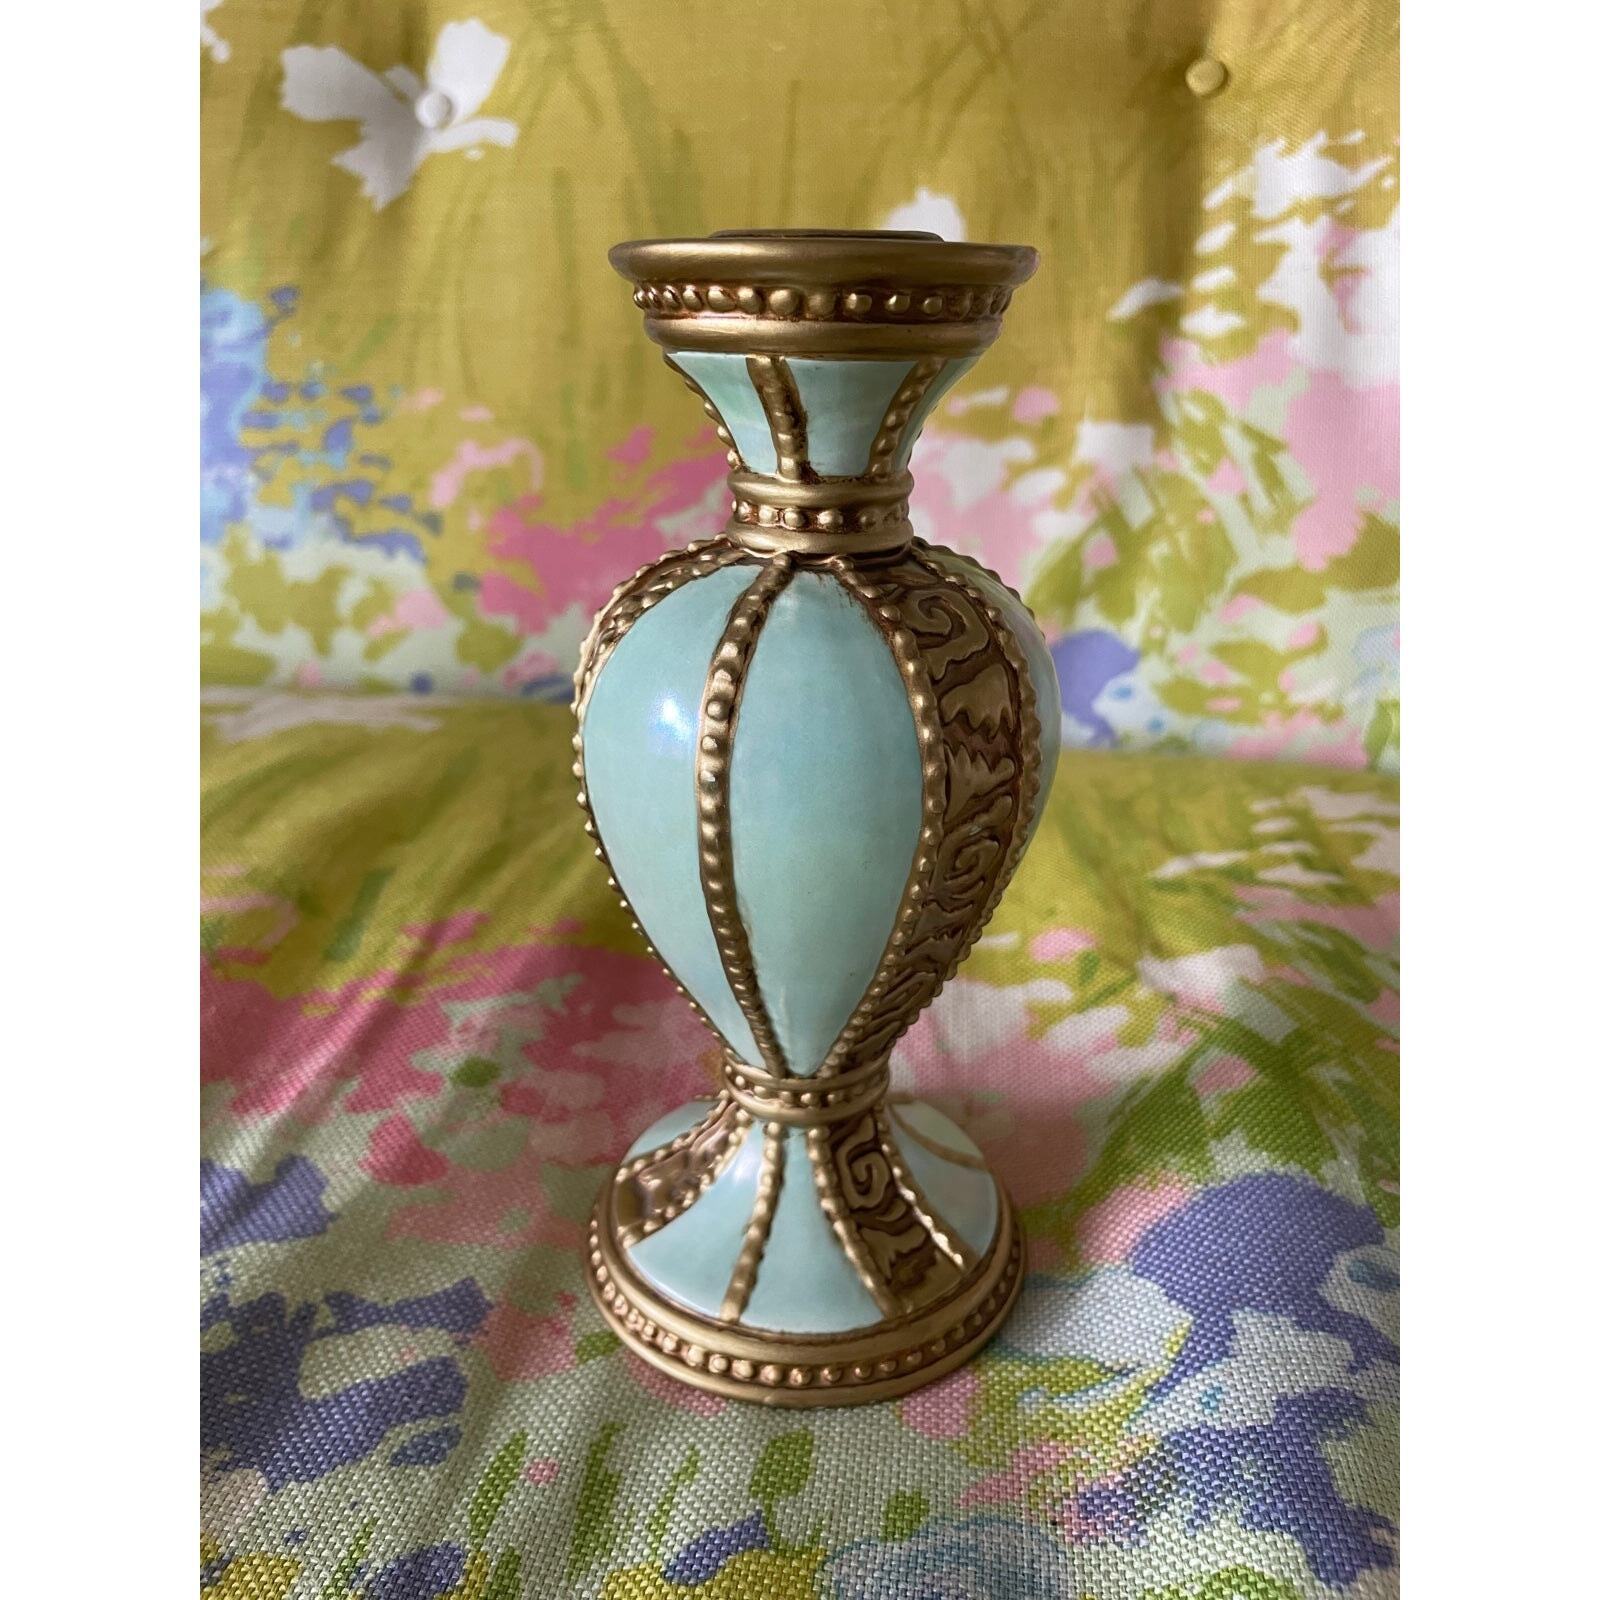 1990s fitz and floyd turquoise and gold ceramic candle holder baroque style